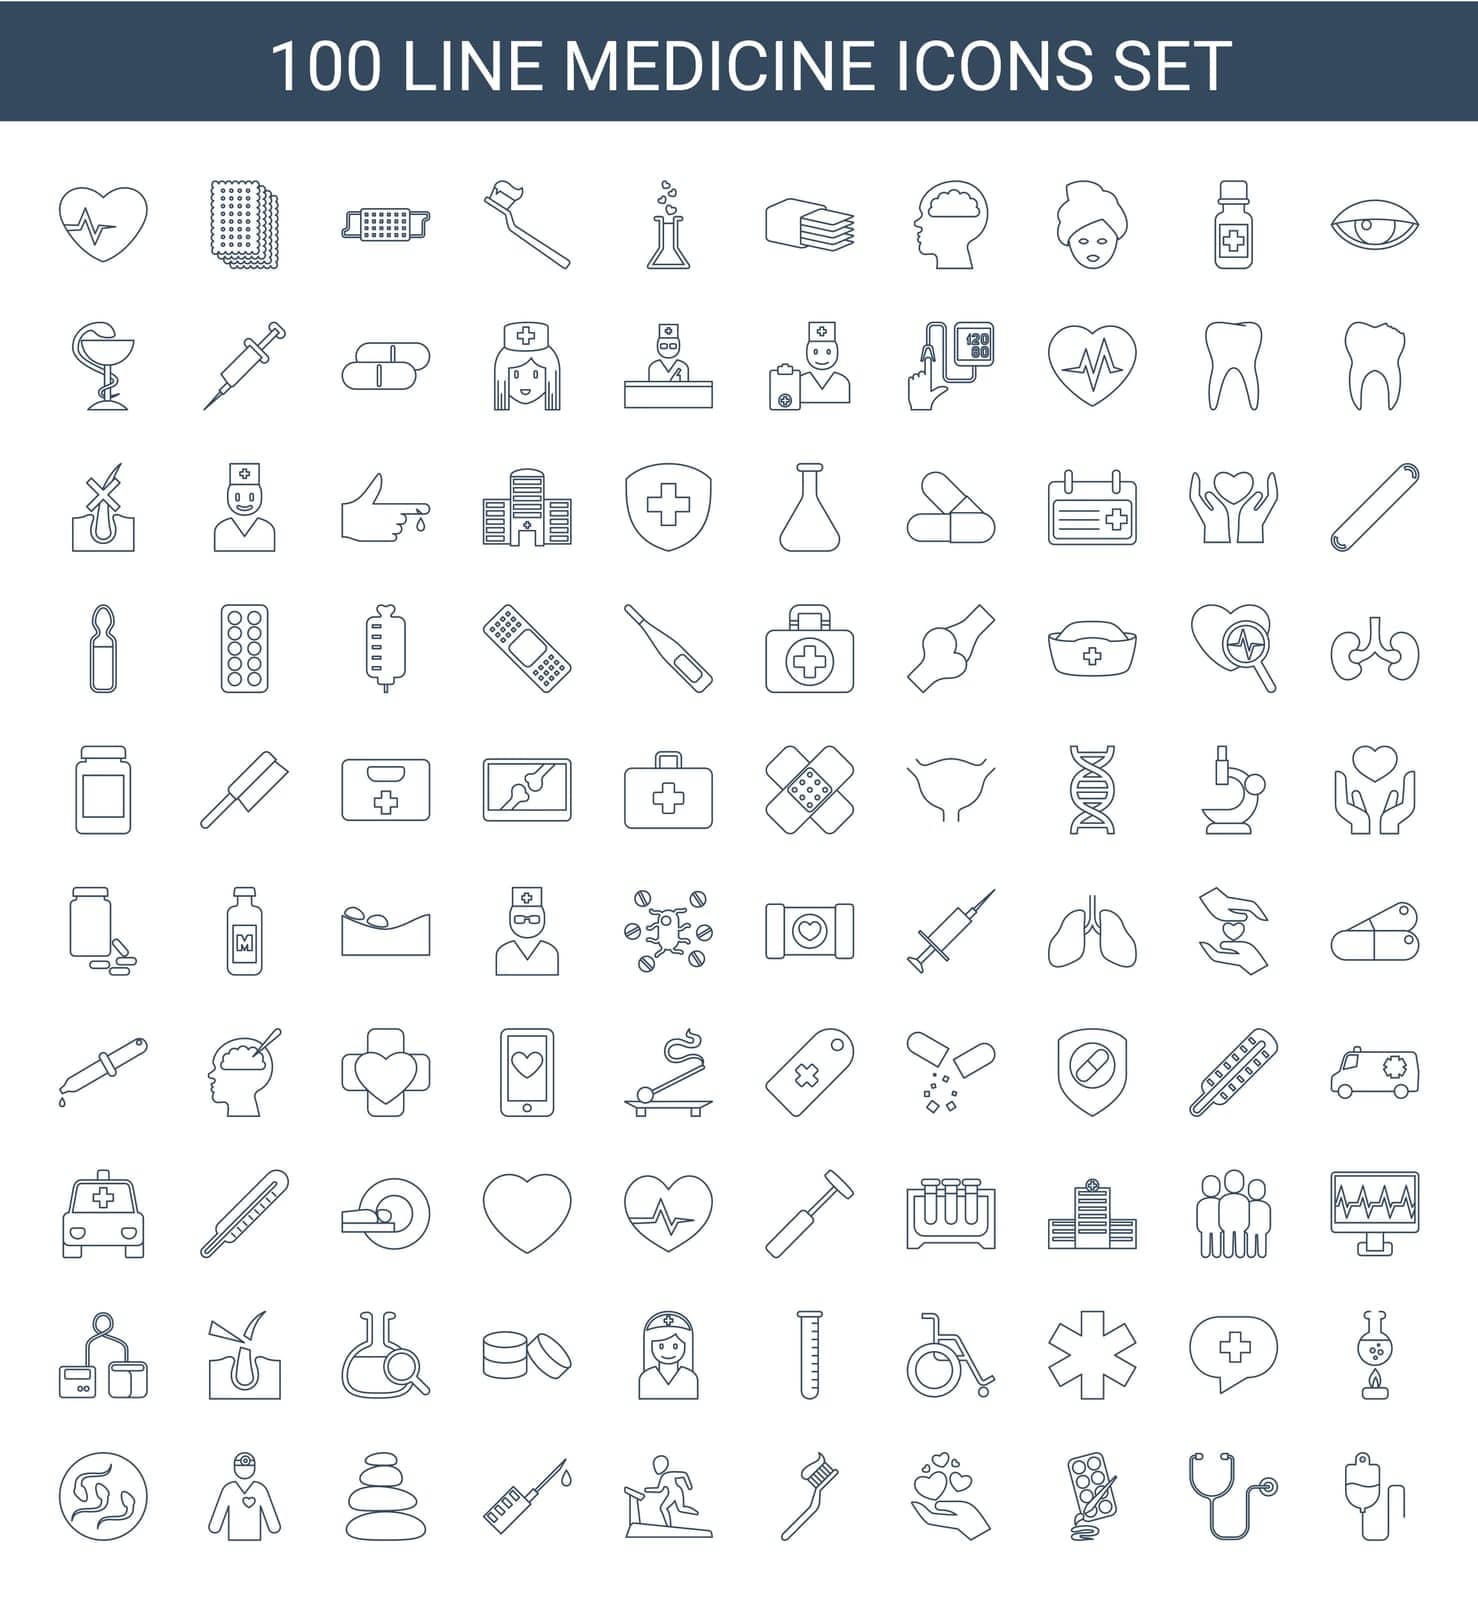 drop,medical,heartbeat,icon,skin,toothbrush,holding,tablet,hair,search,nurse,vector,stethoscope,shave,hand,set,test,spa,in,wheel,chair,cross,medicine,sperm,counter,pressure,heart,tool,doctor,rash,blod,with,tube,paints,reflector,stones,injection,treadmill